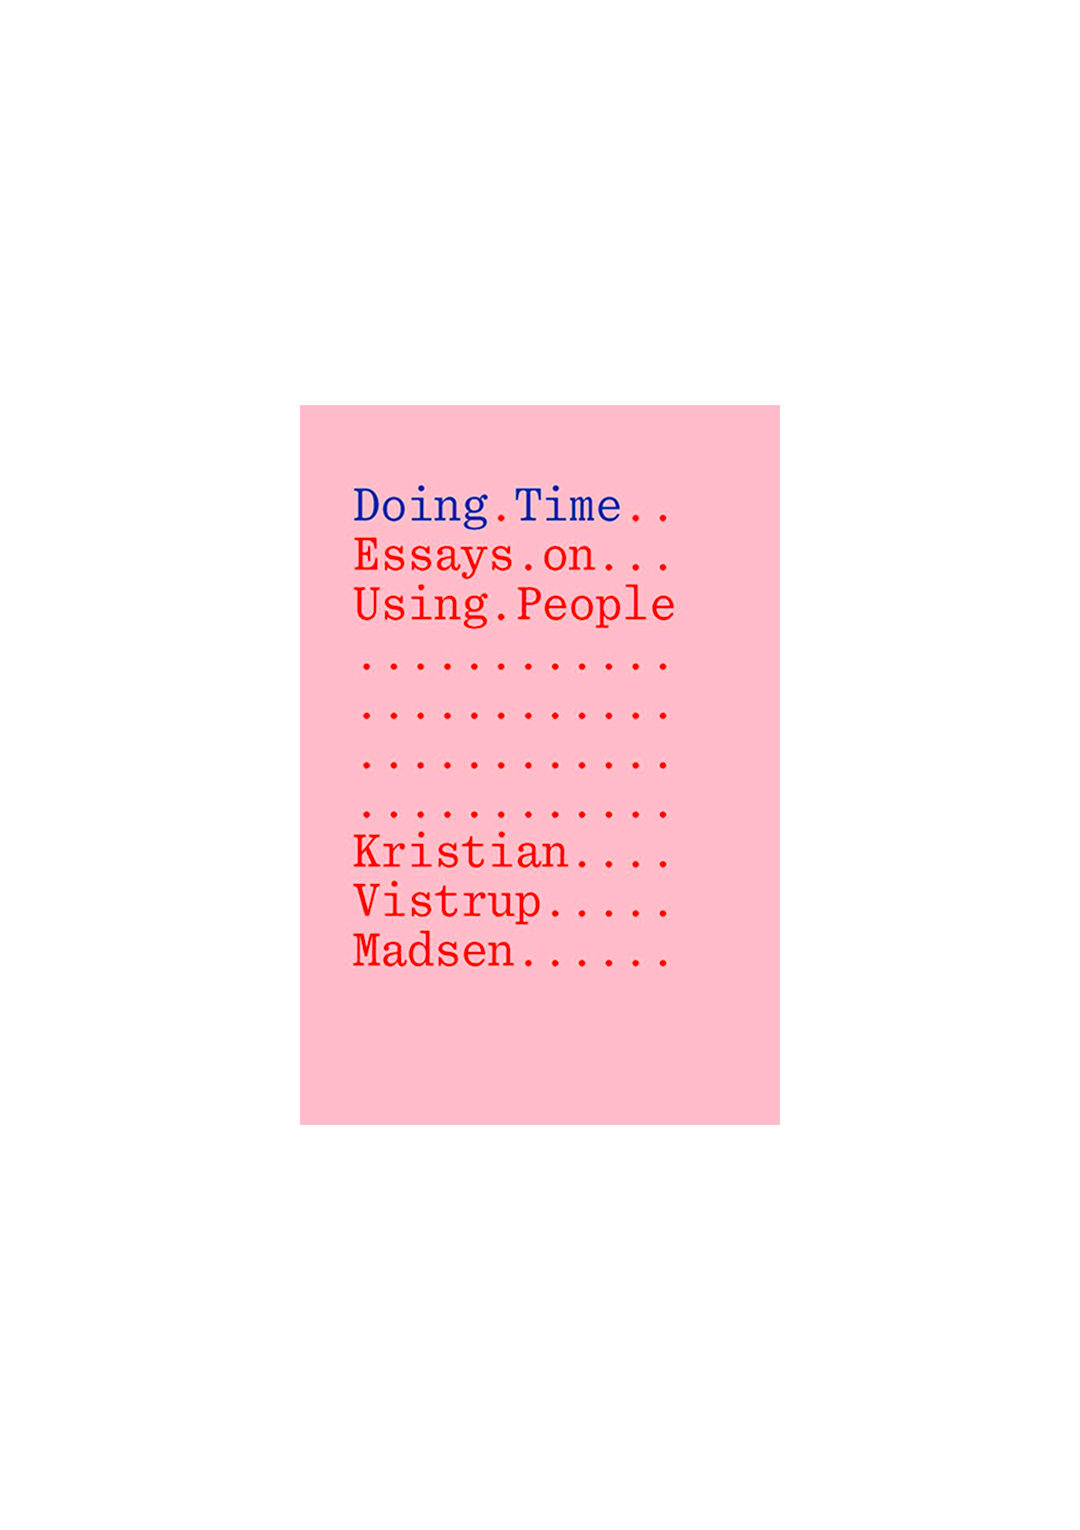 Doing Time - Essays on Using People